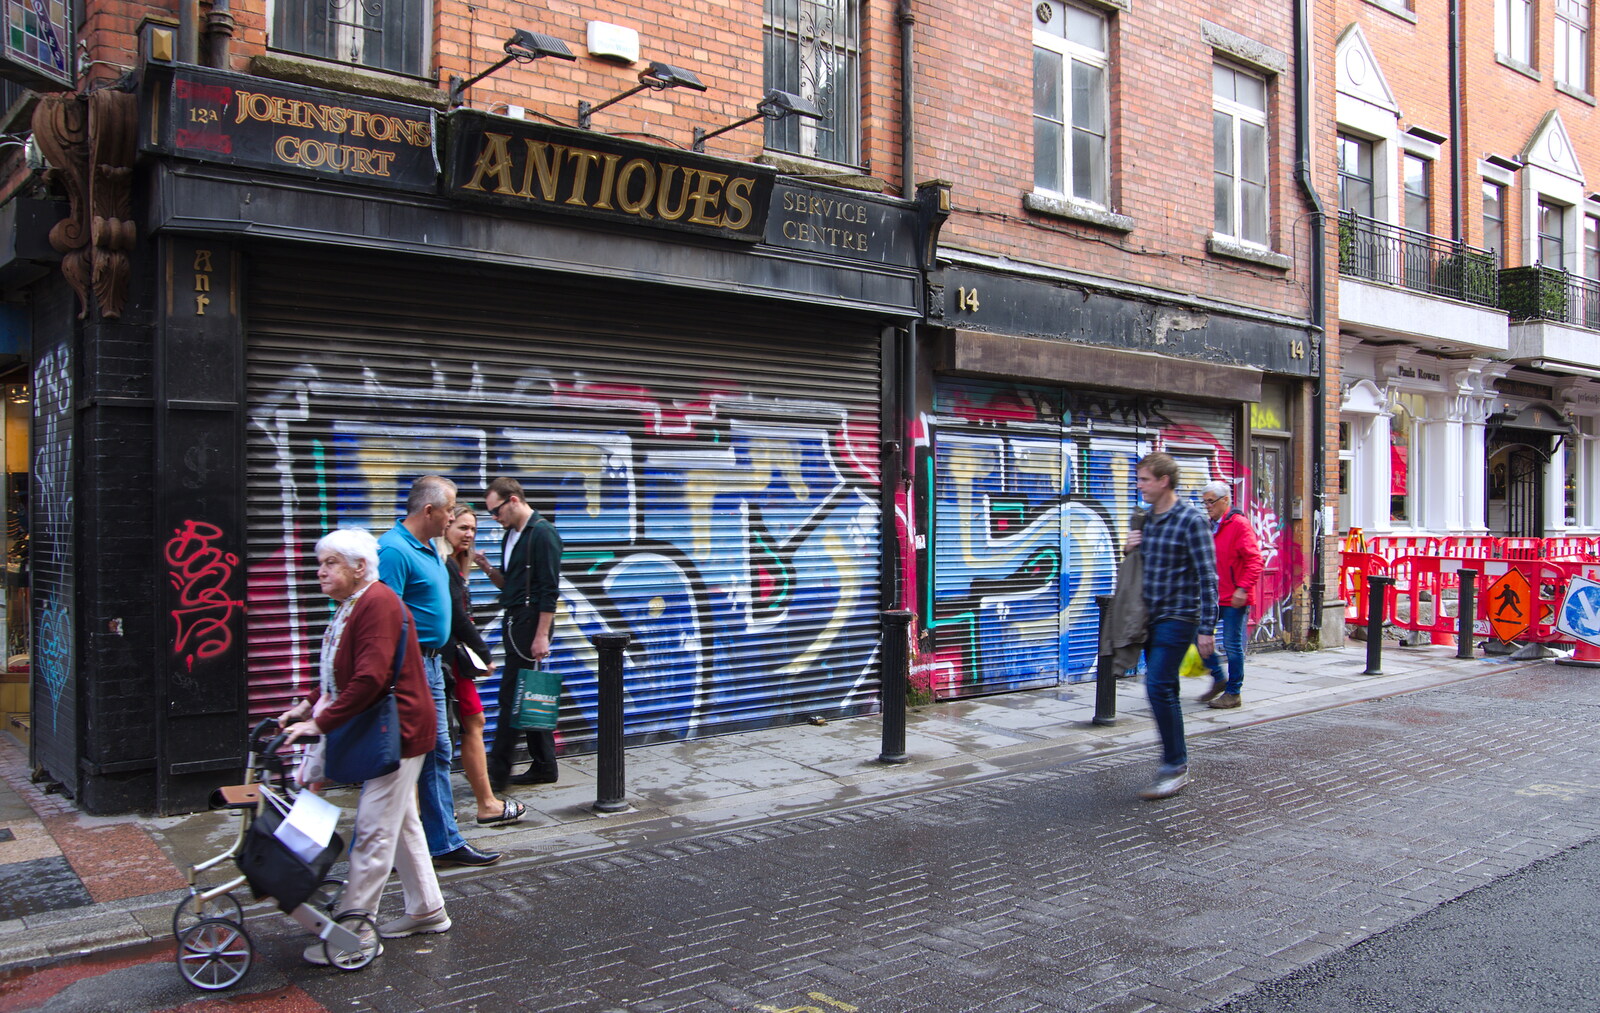 Derelict antique shop from Busking in Temple Bar, Dublin, Ireland - 12th August 2019